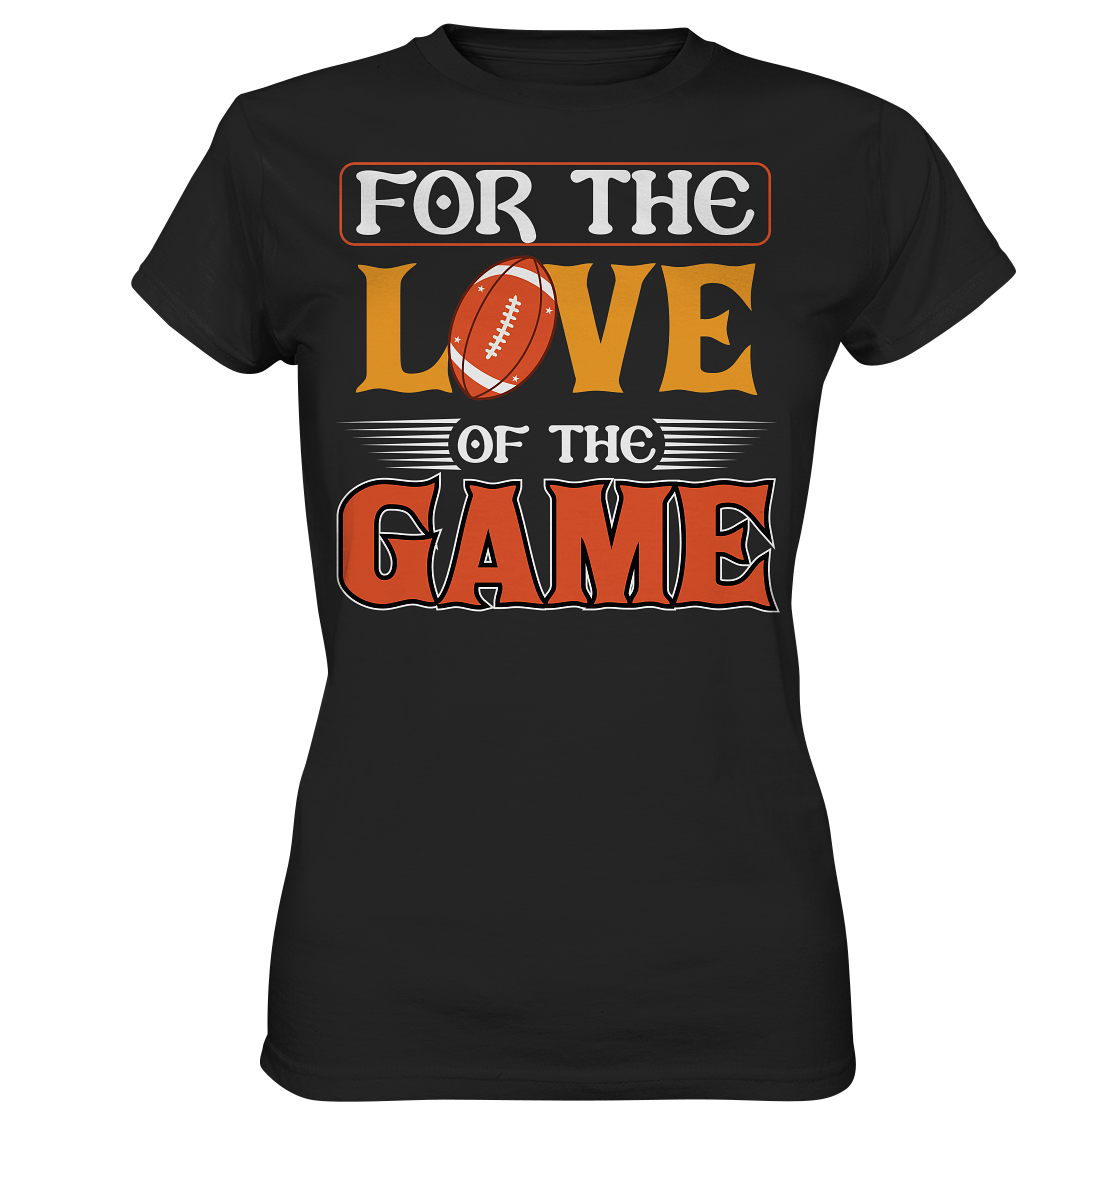 For the Love of the Game - Ladies Premium Shirt - Football Unity Football Unity